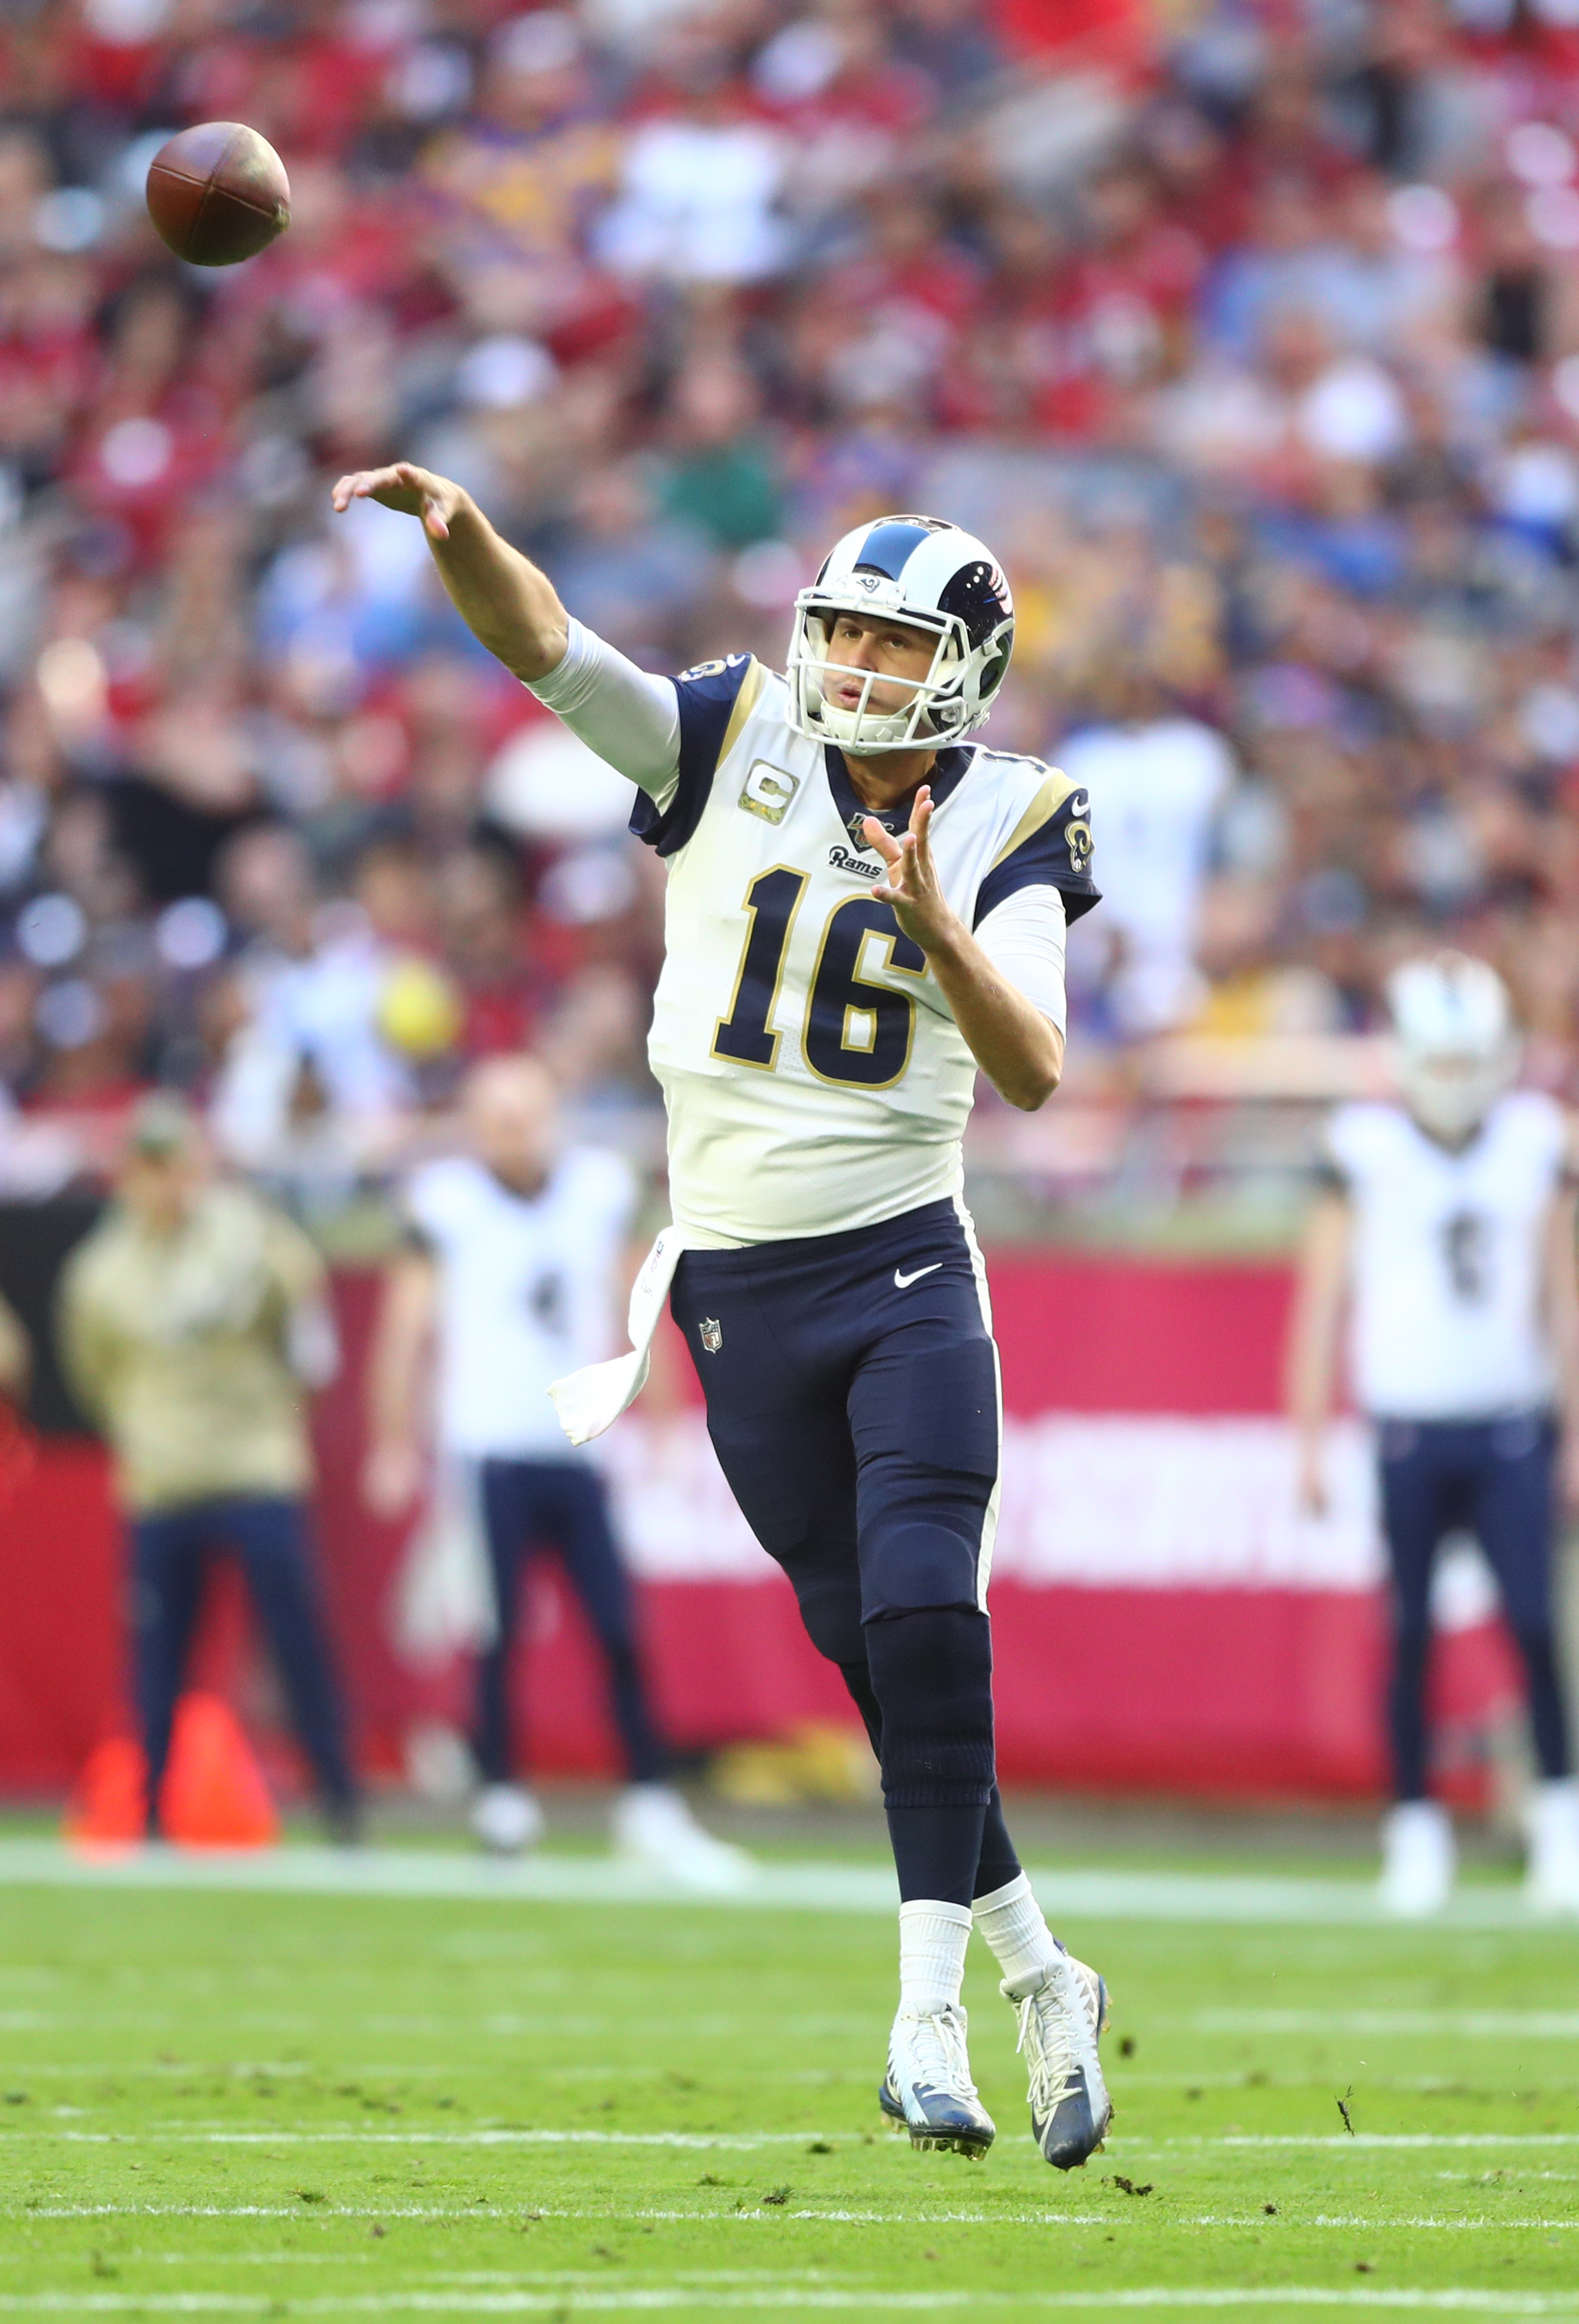 Los Angeles Rams QB Jared Goff throws a pass against the Arizona Cardinals in Week 13, Dec. 1, 2019.